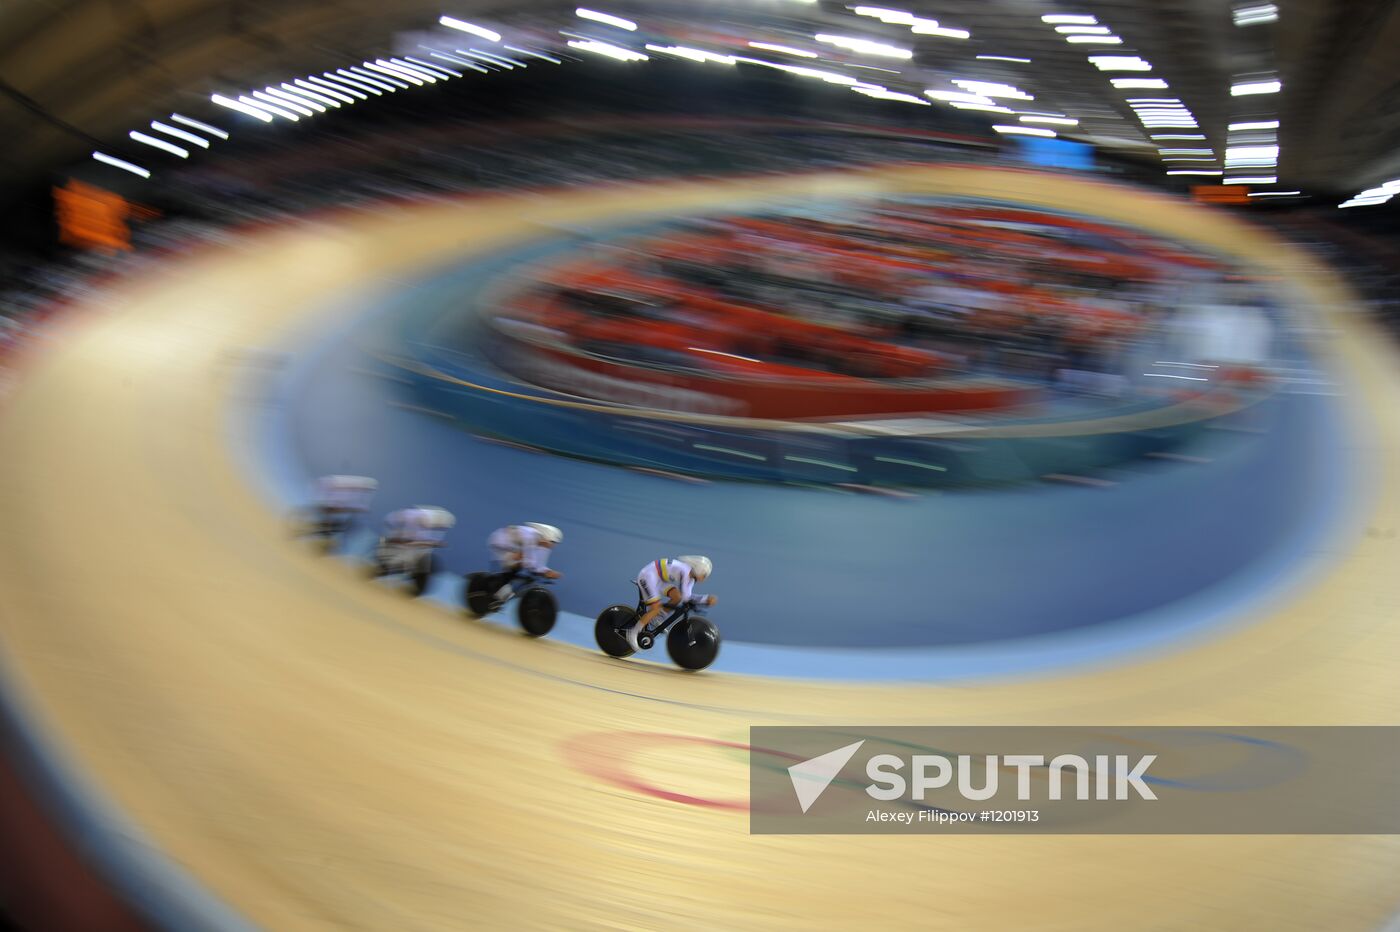 2012 Olympics. Cycle track. Team pursuit